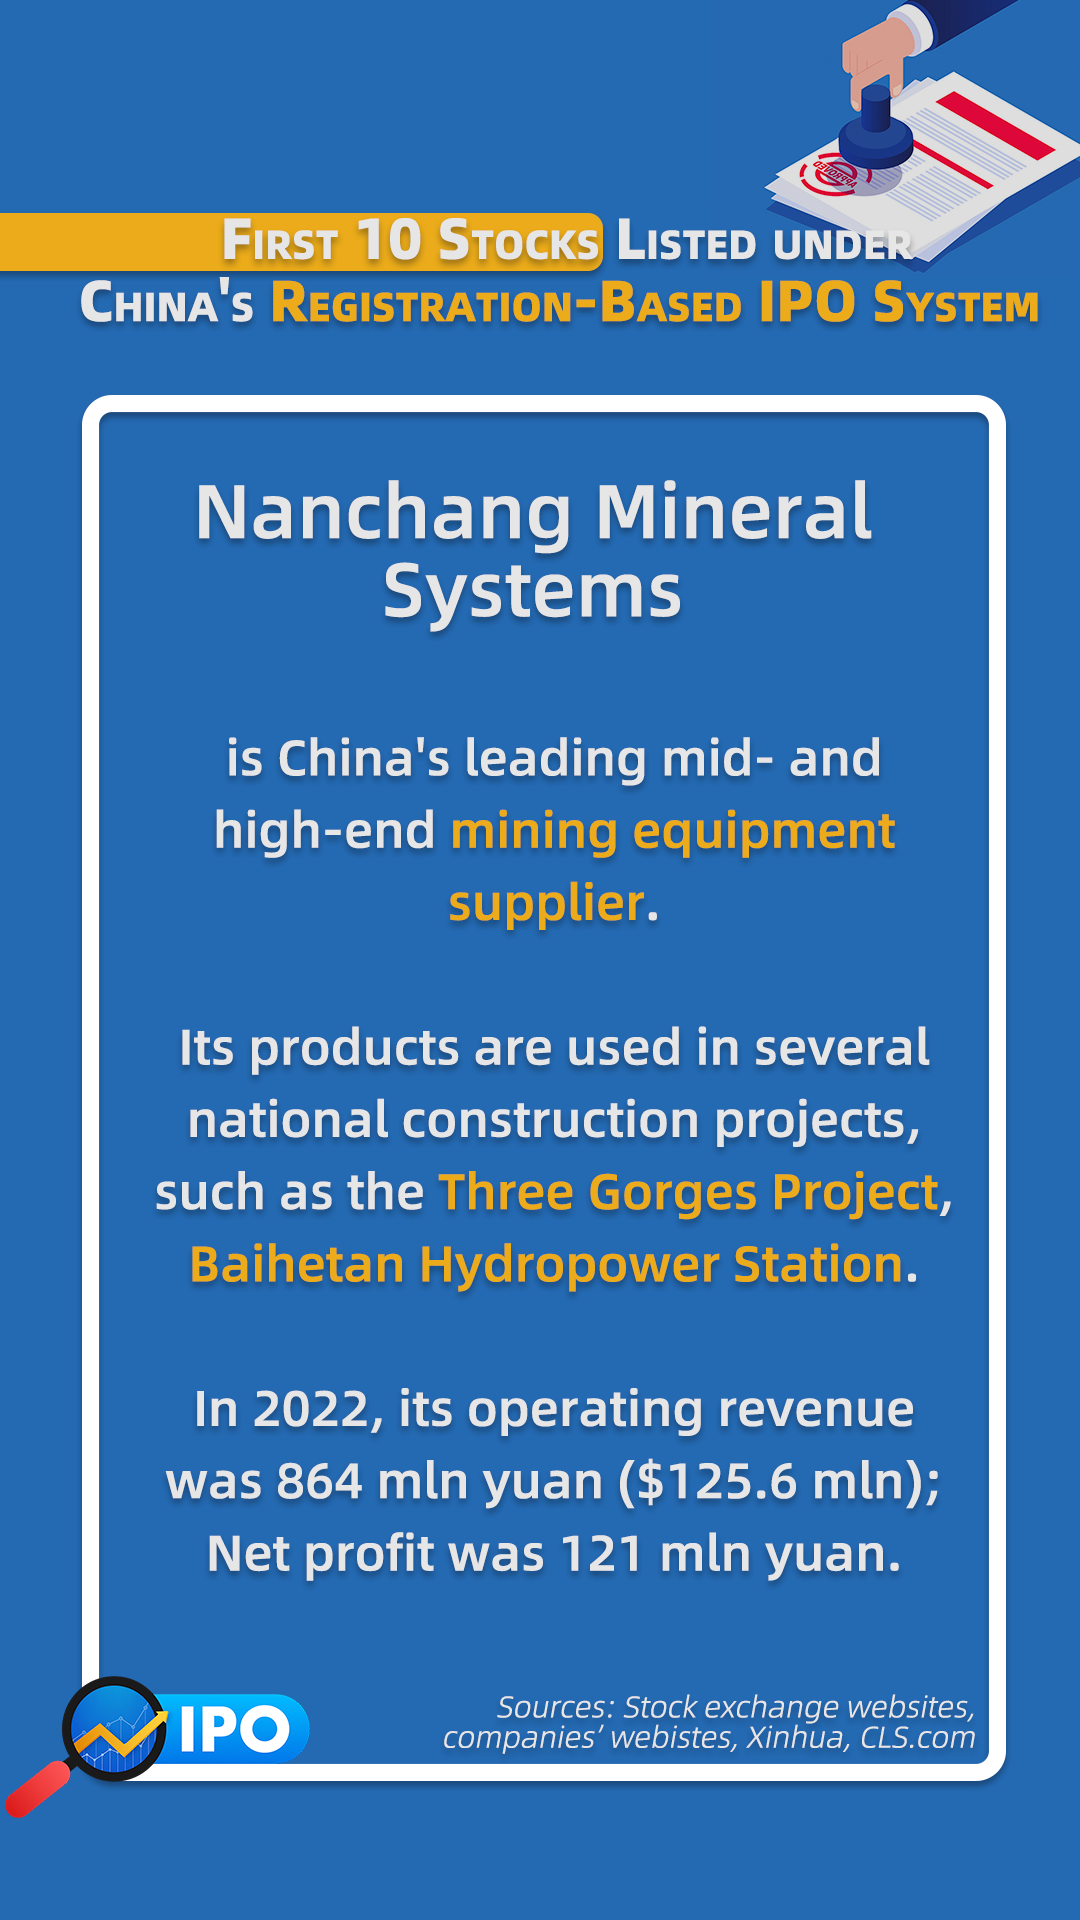 Nanchang Mineral Systems, one of the 10 listed companies